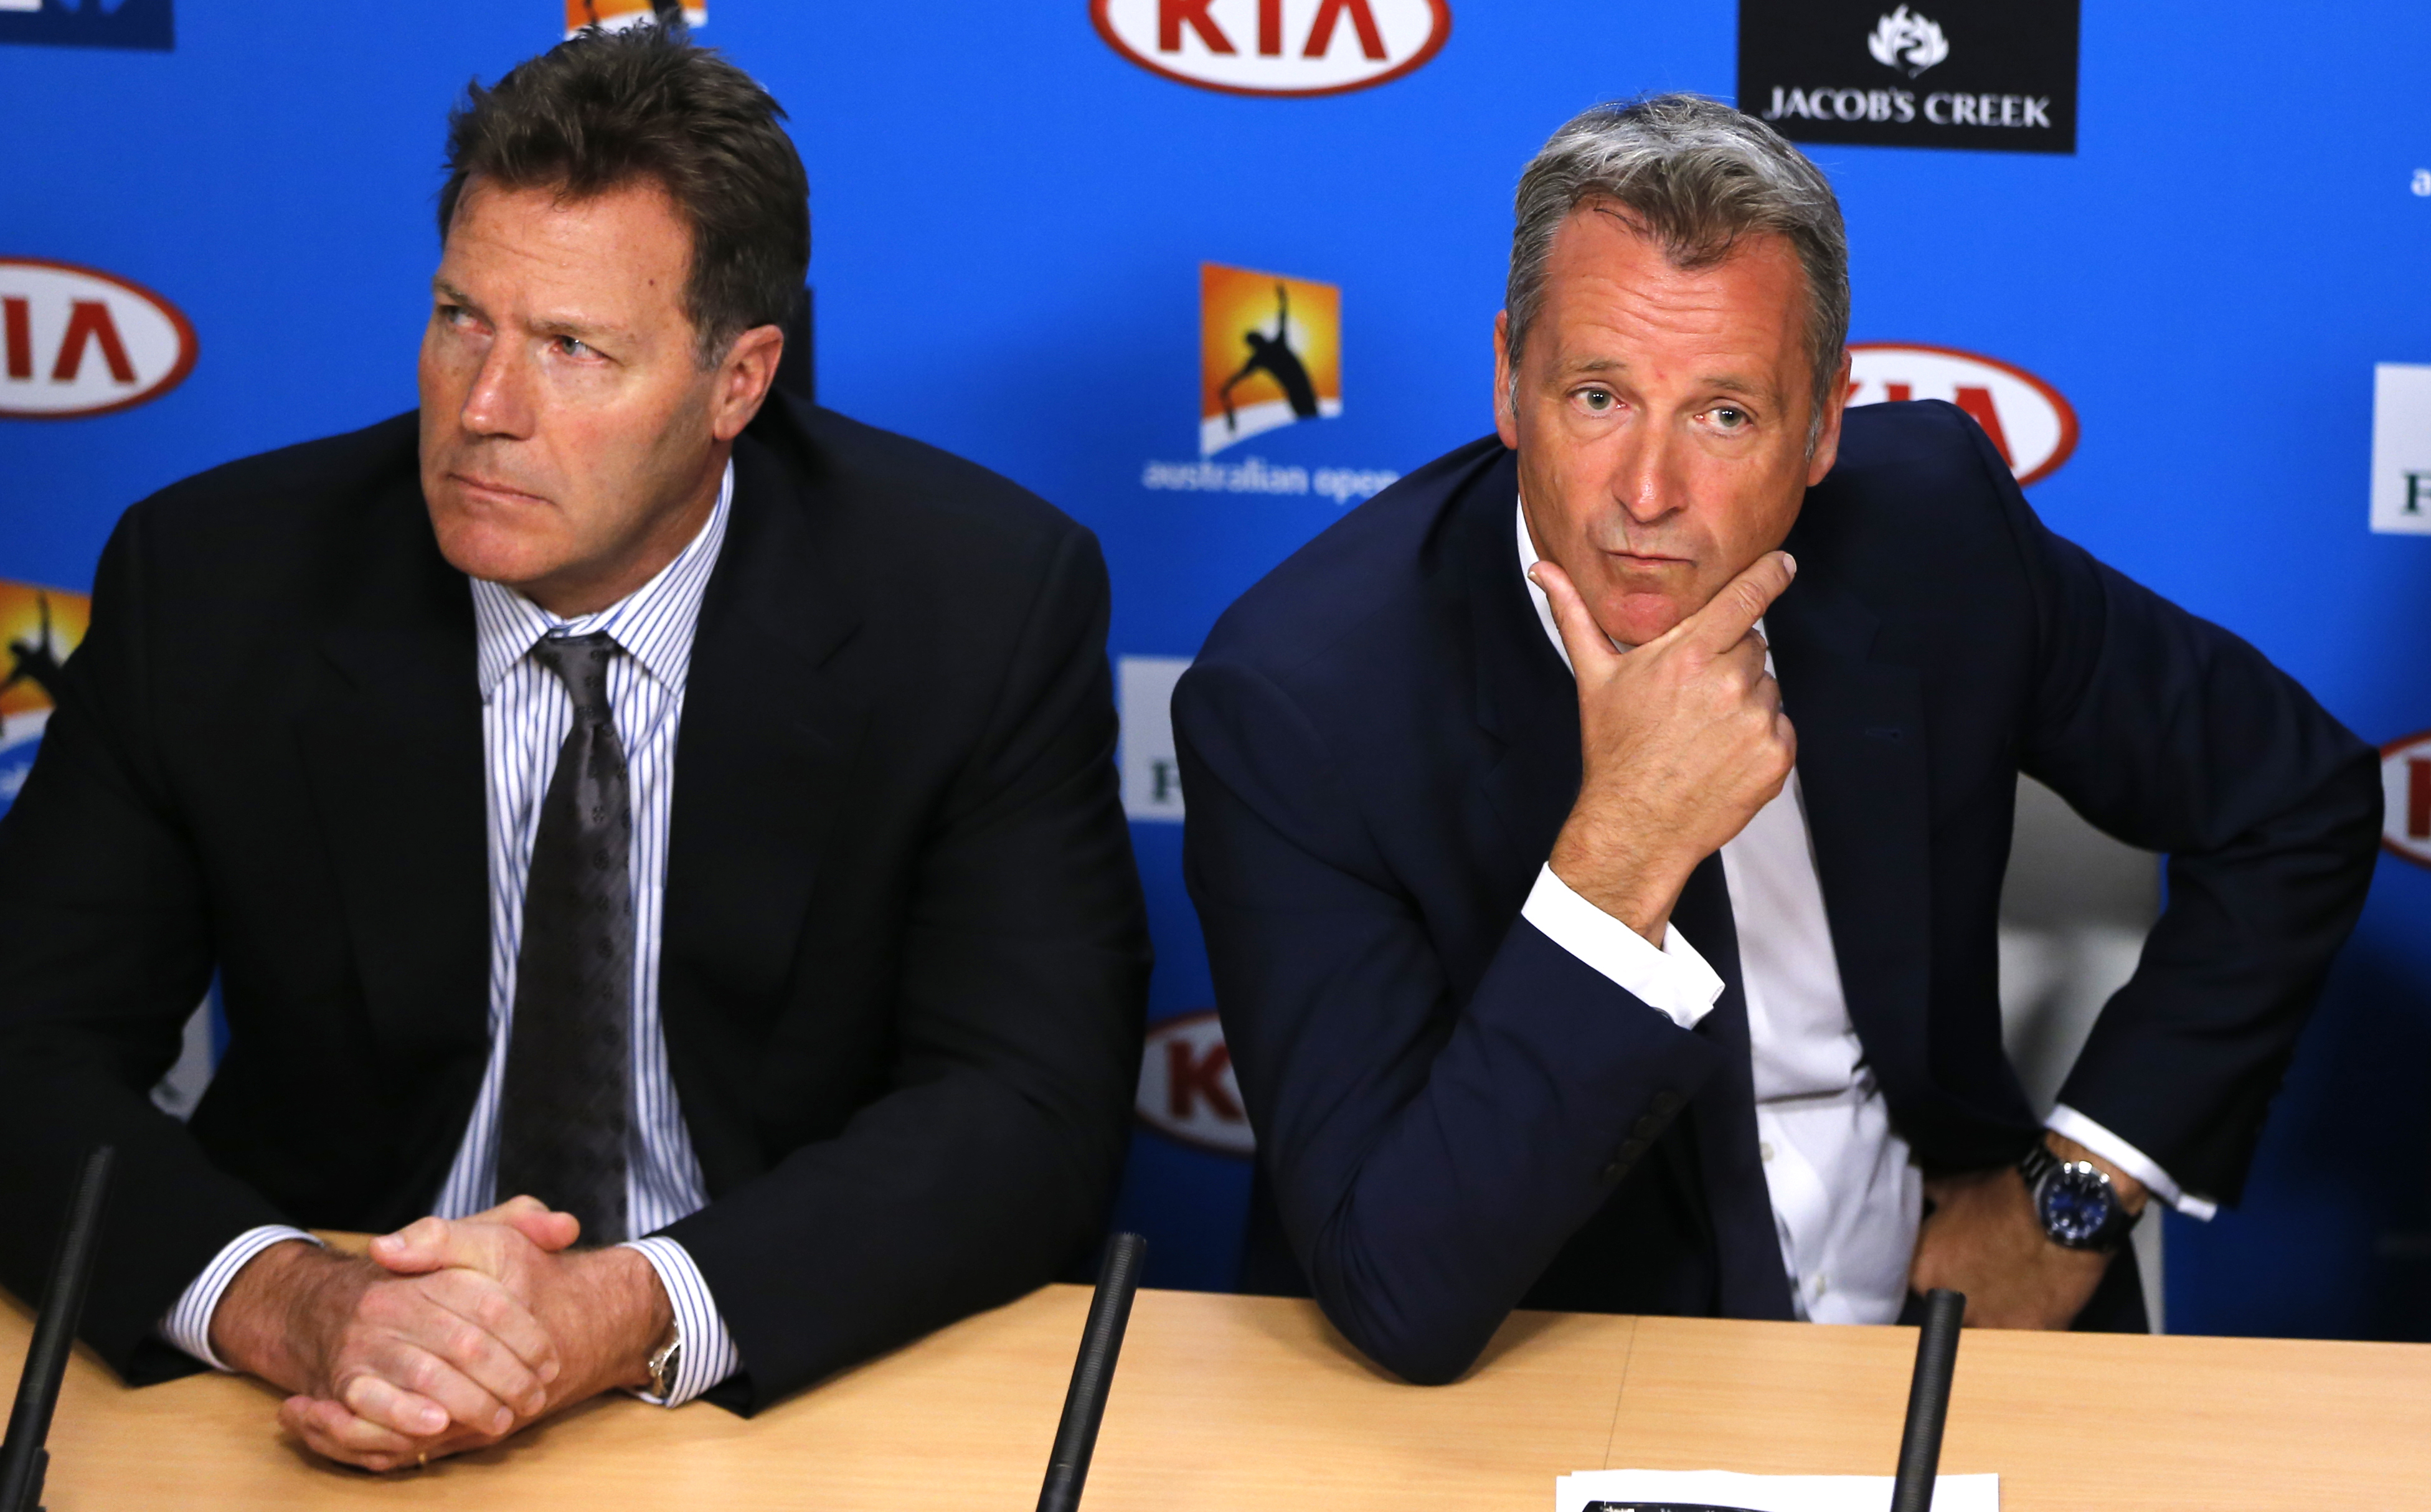 ATP chairman Chris Kermode and vice chairman Mark Young listen to reporter's question during a press conference at the Australian Open tennis championships in Melbourne, Australia on Jan. 18, 2016. (Shuji Kajiyama—AP)